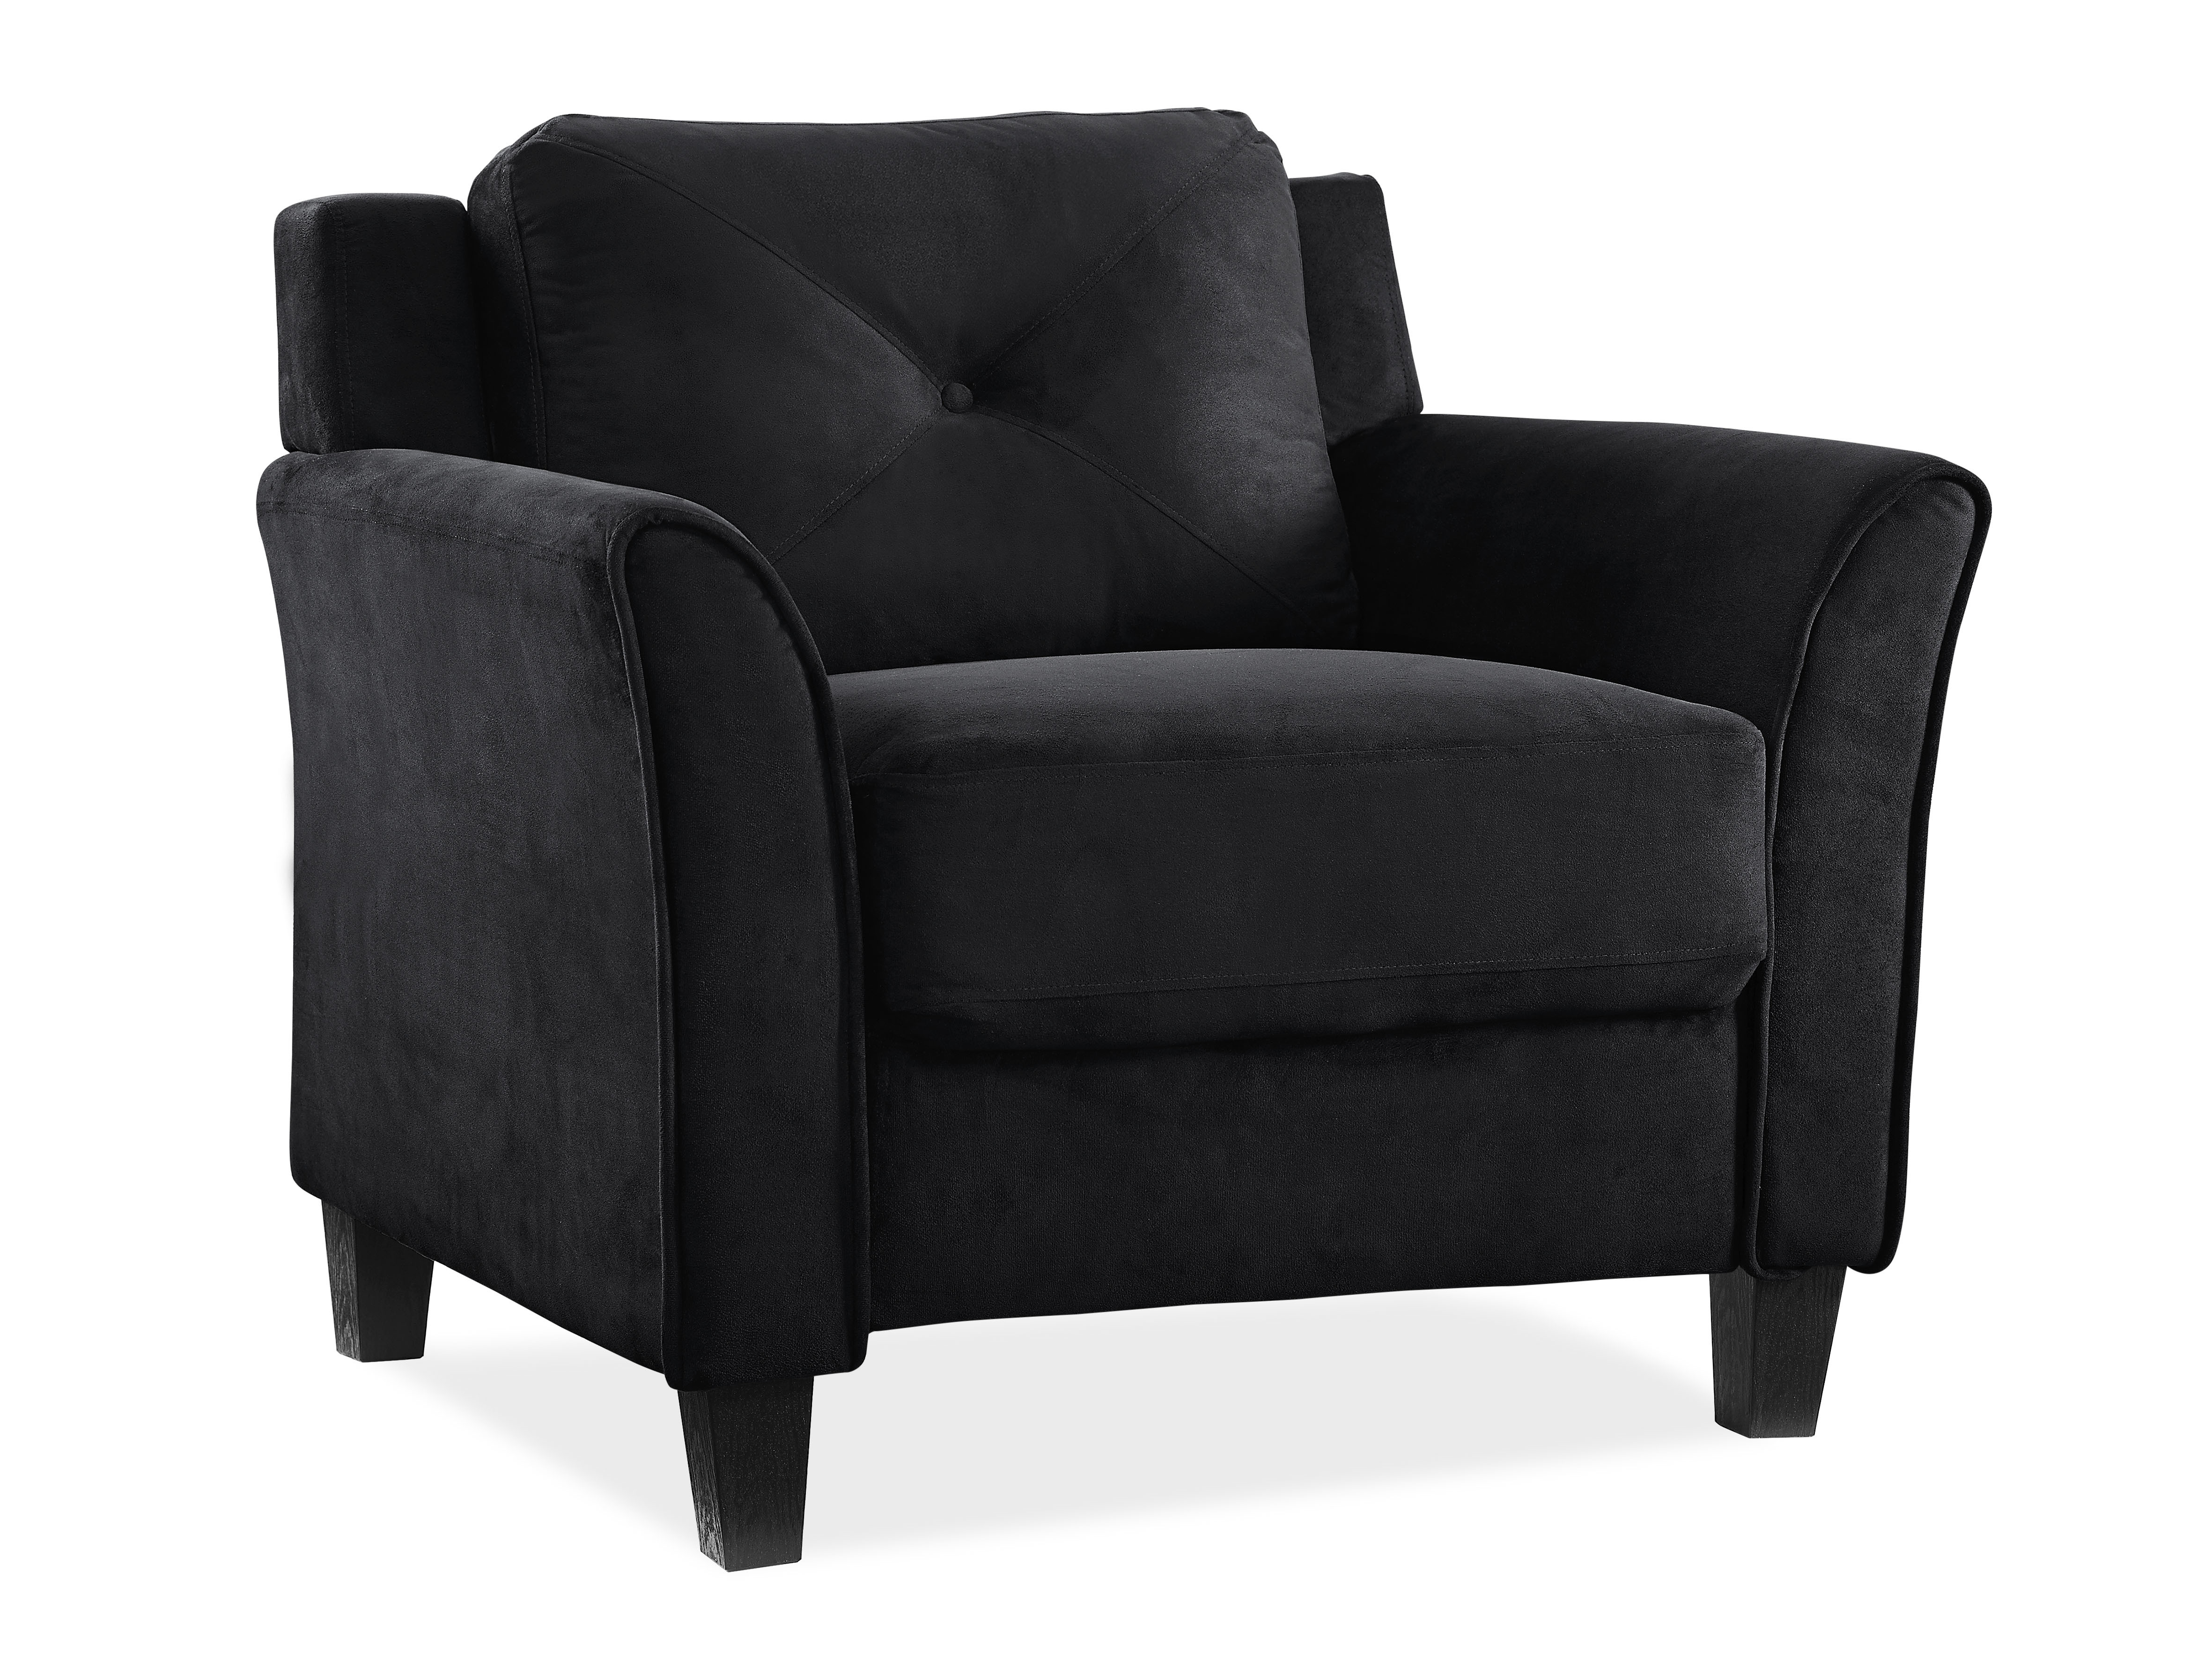 Lifestyle Solutions Taryn Club Chair, Black Fabric - image 1 of 17